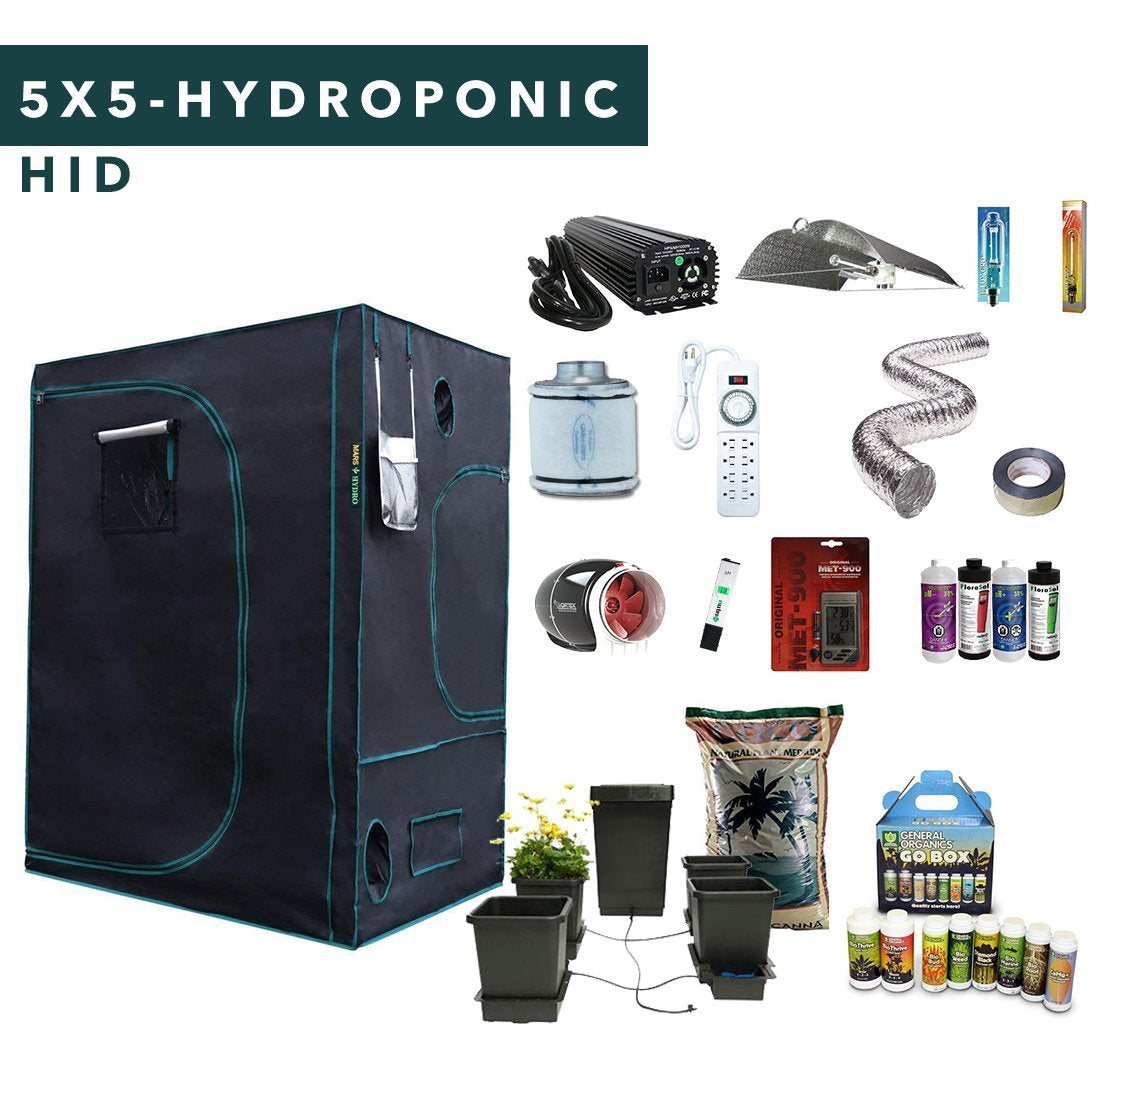 5' X 5' HID Hydroponic Complete Indoor Grow Tent Kits for 6 Plants